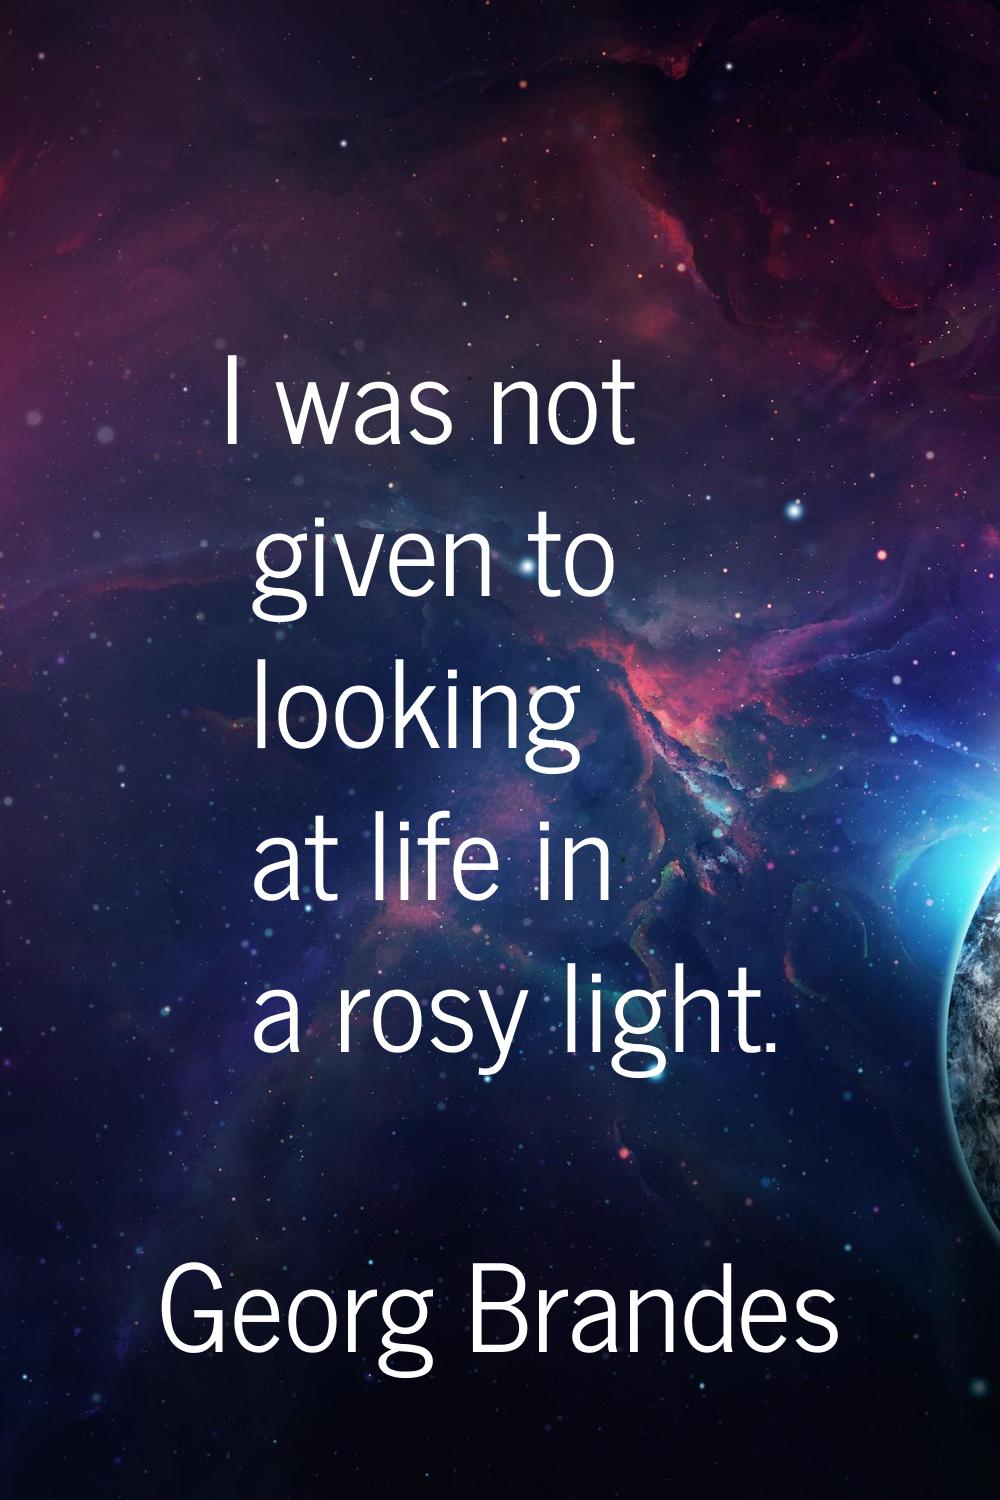 I was not given to looking at life in a rosy light.